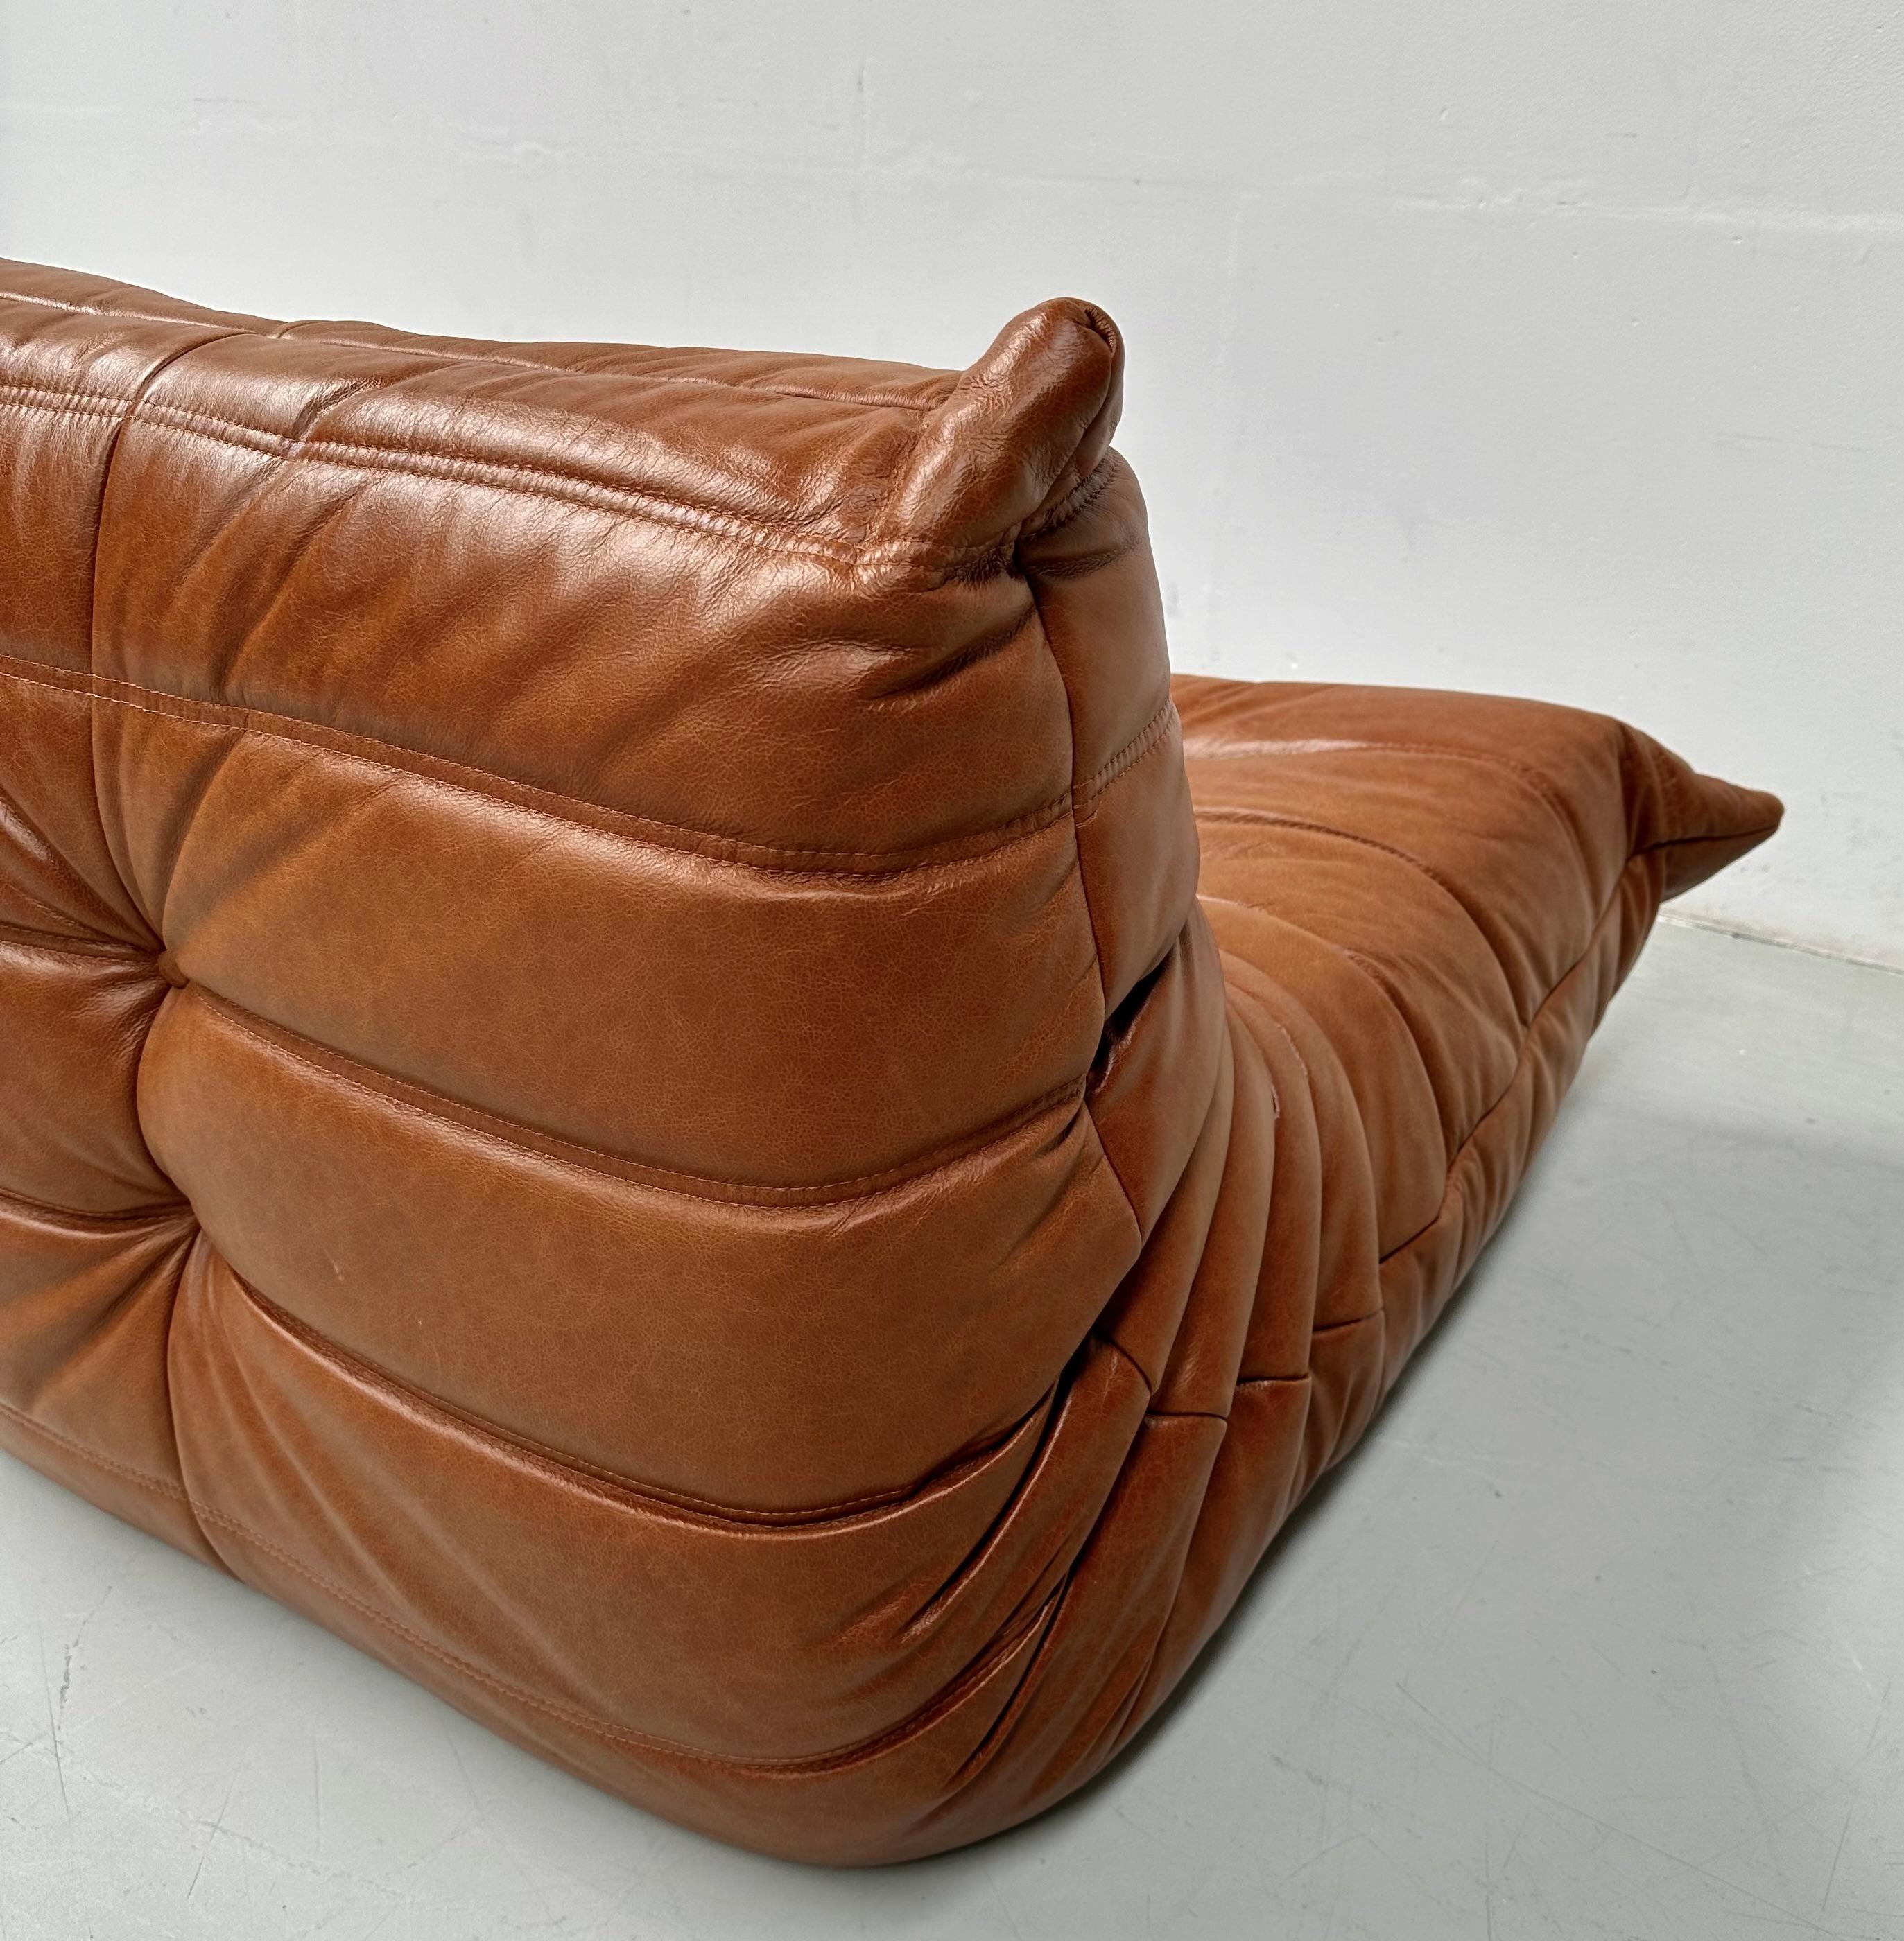 Fabric French Togo Chair and Ottoman in Cognac Leather by M. Ducaroy for Ligne Roset. For Sale